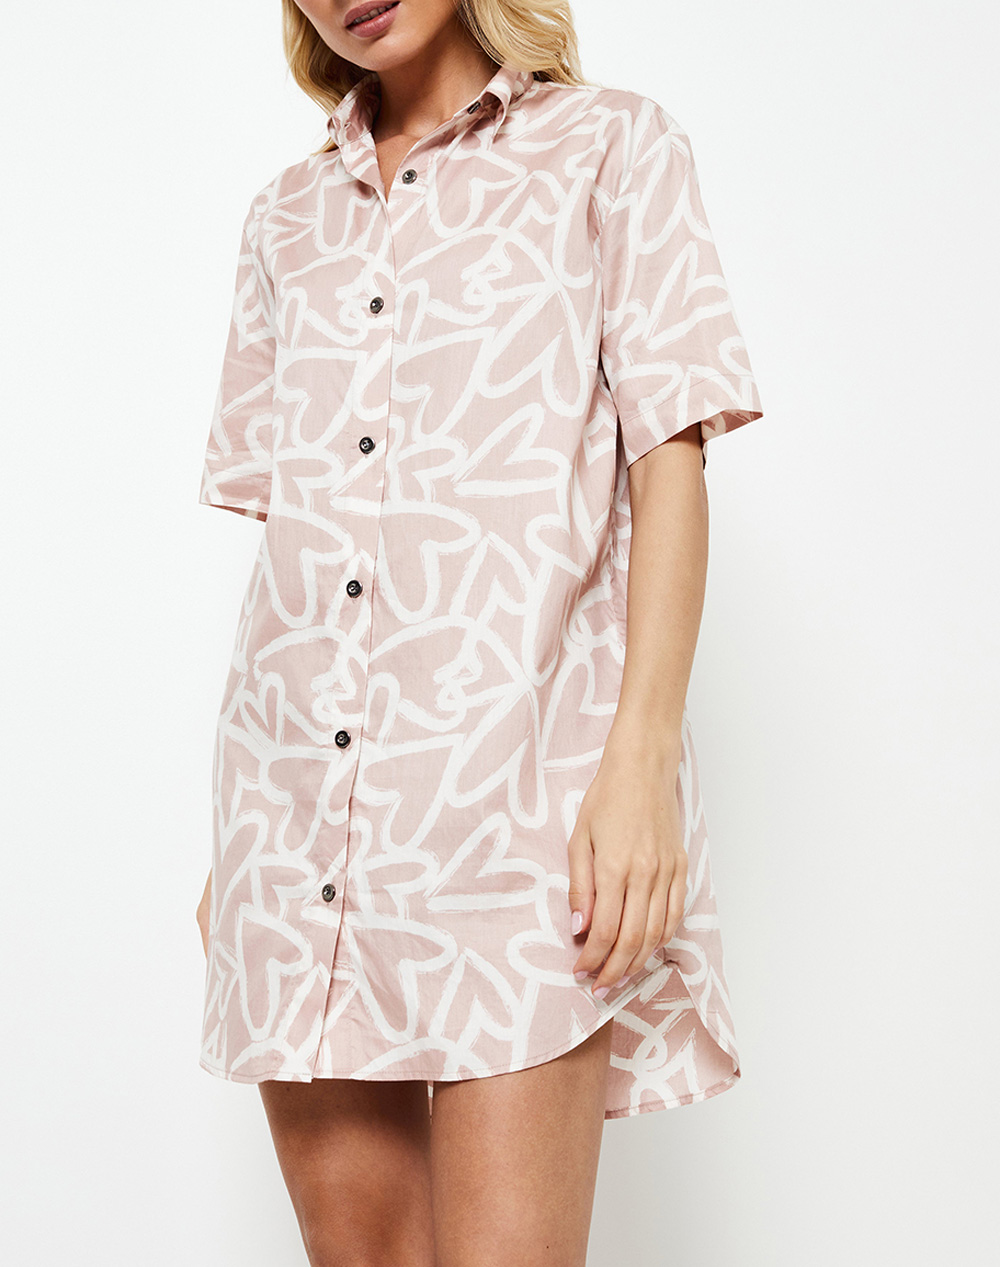 ARUELLE Miley nightdress SS24 39.01.06.014-NO COLOR Mixed